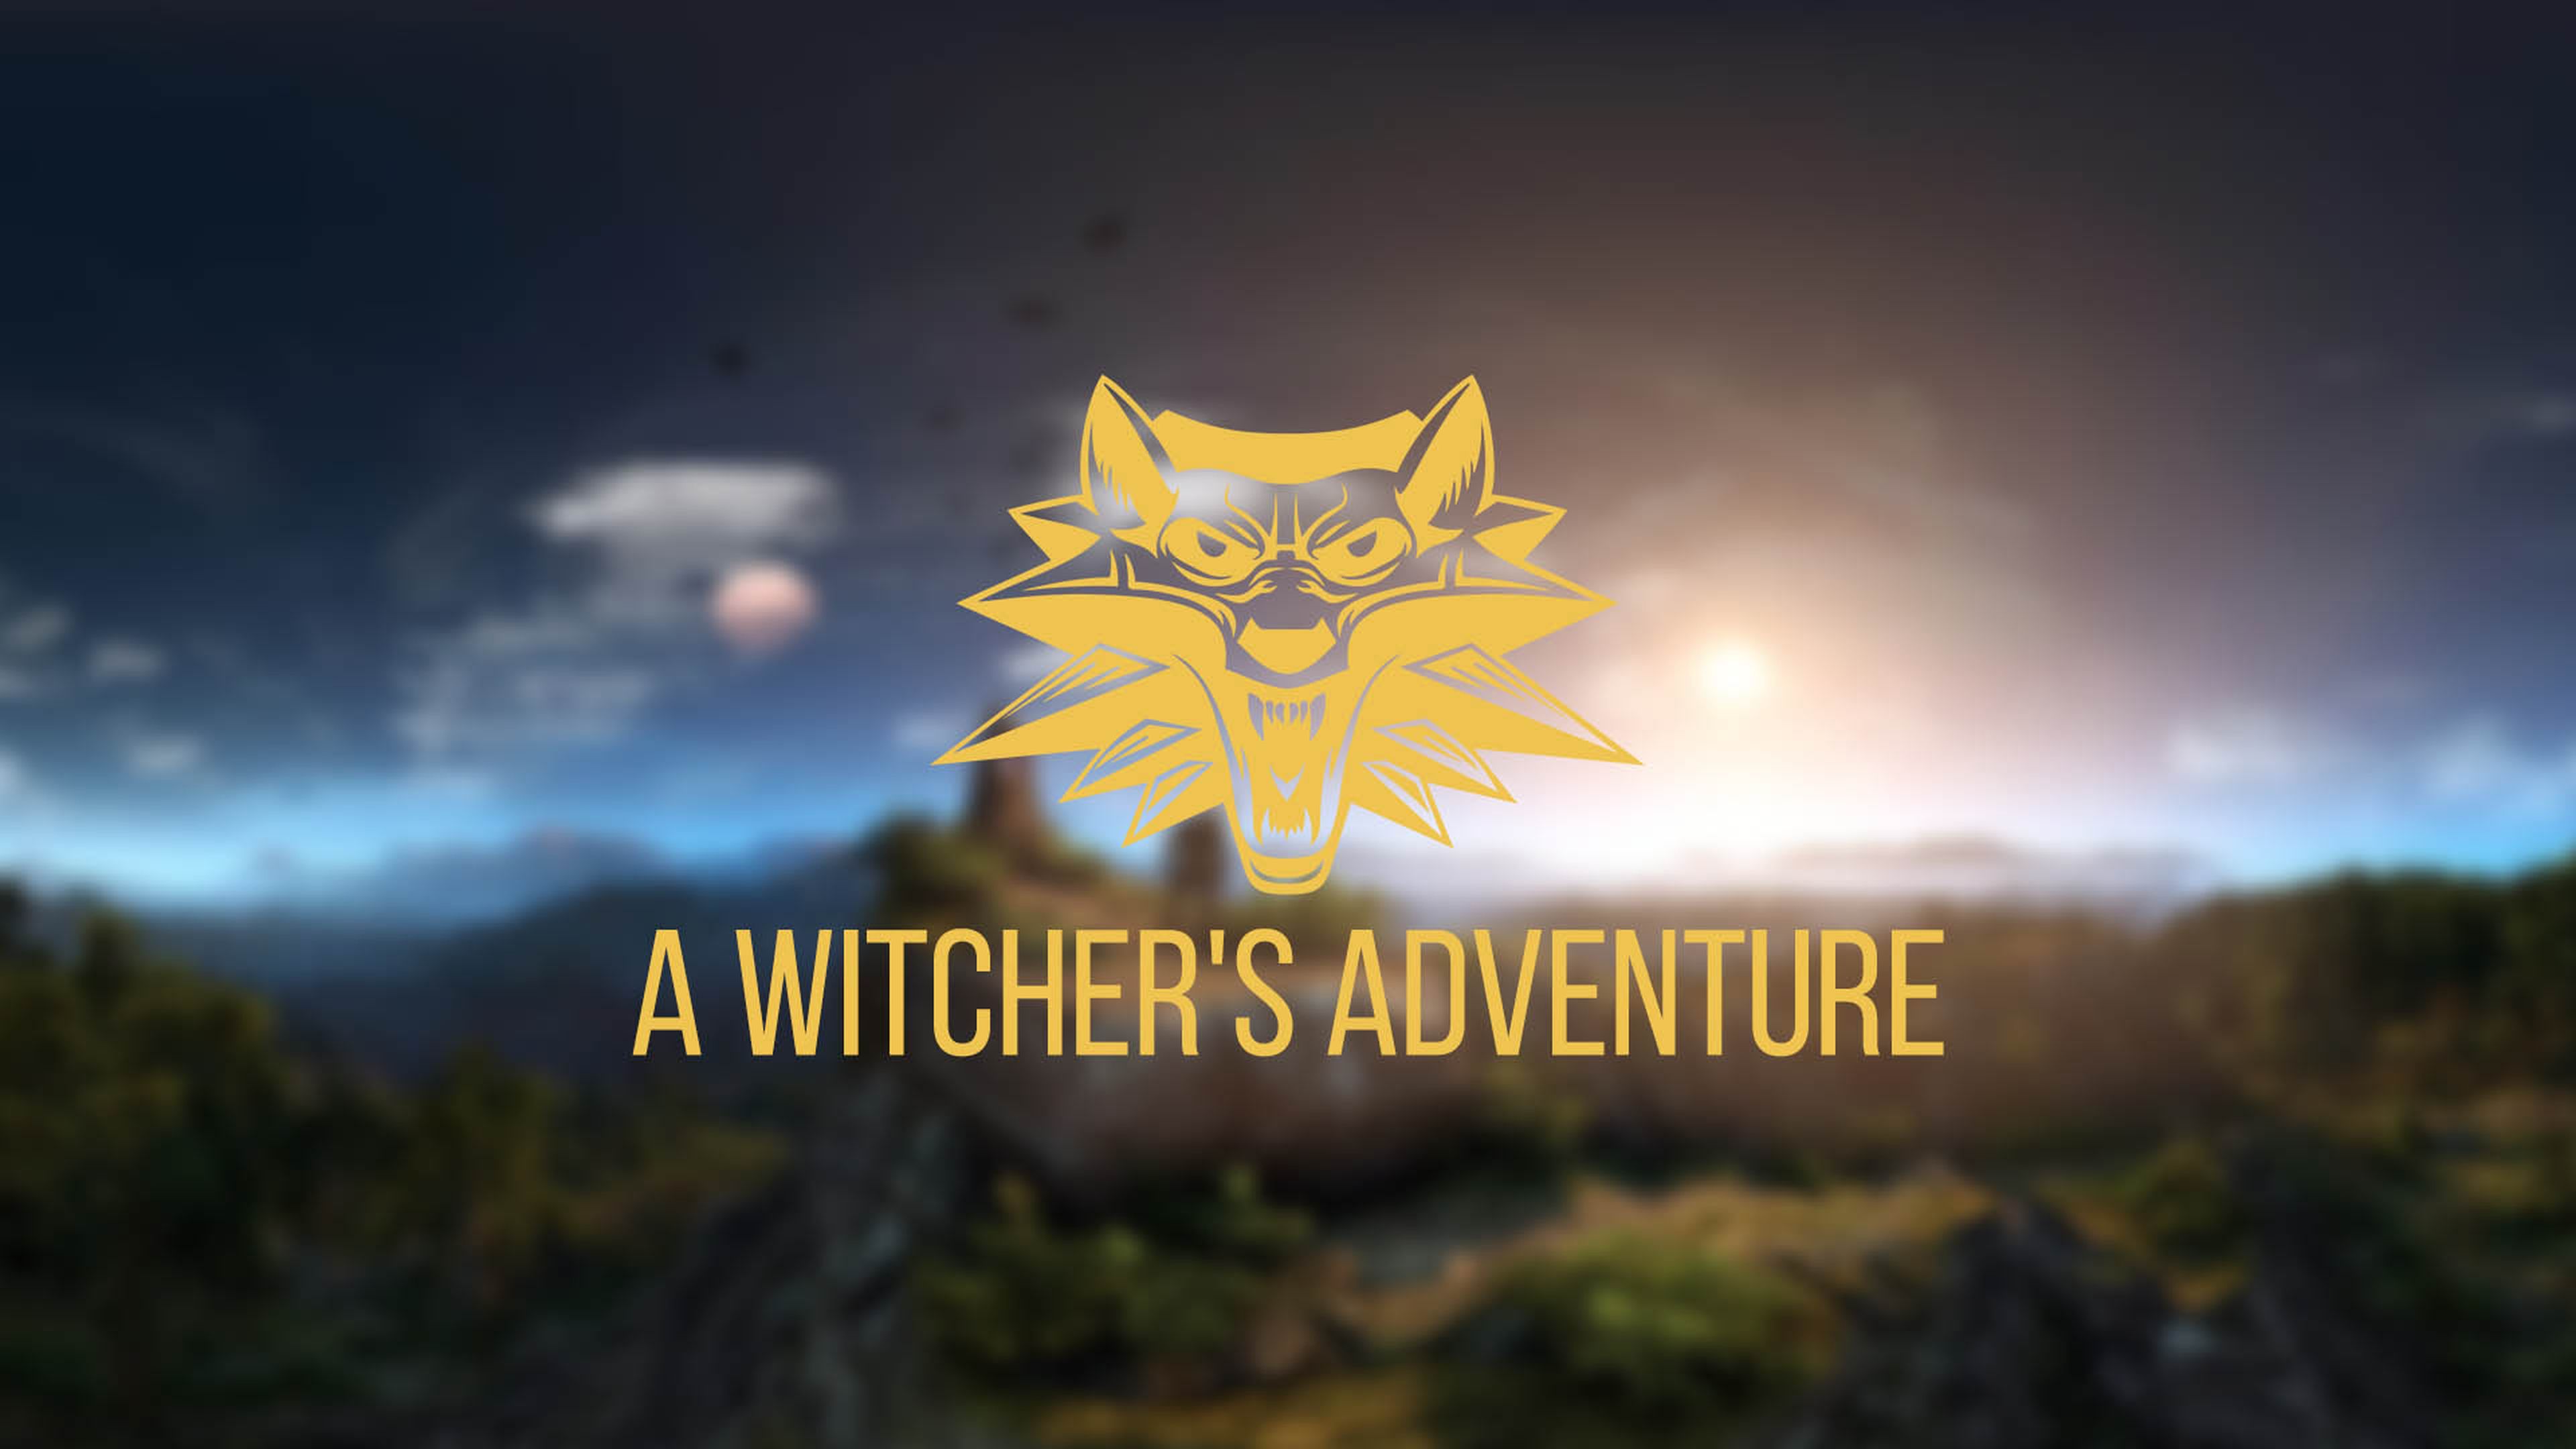 A Witcher's Adventure